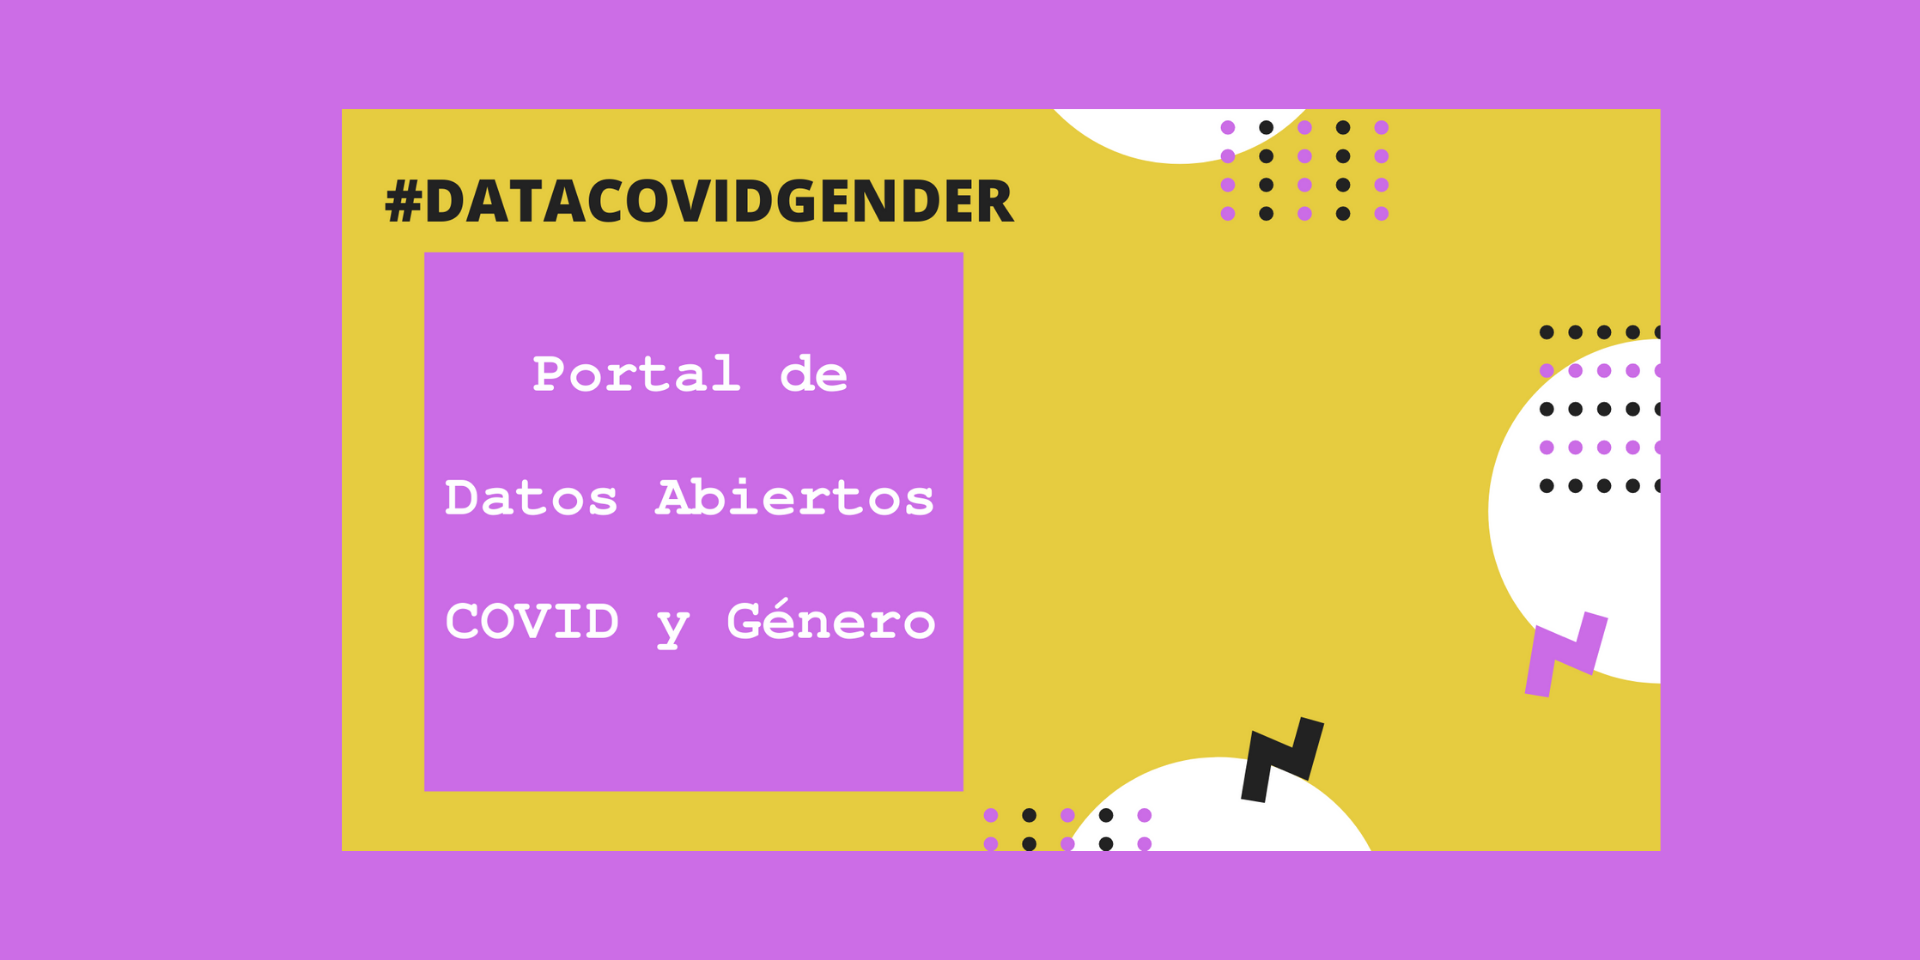 Proyecto Data COVID Gender